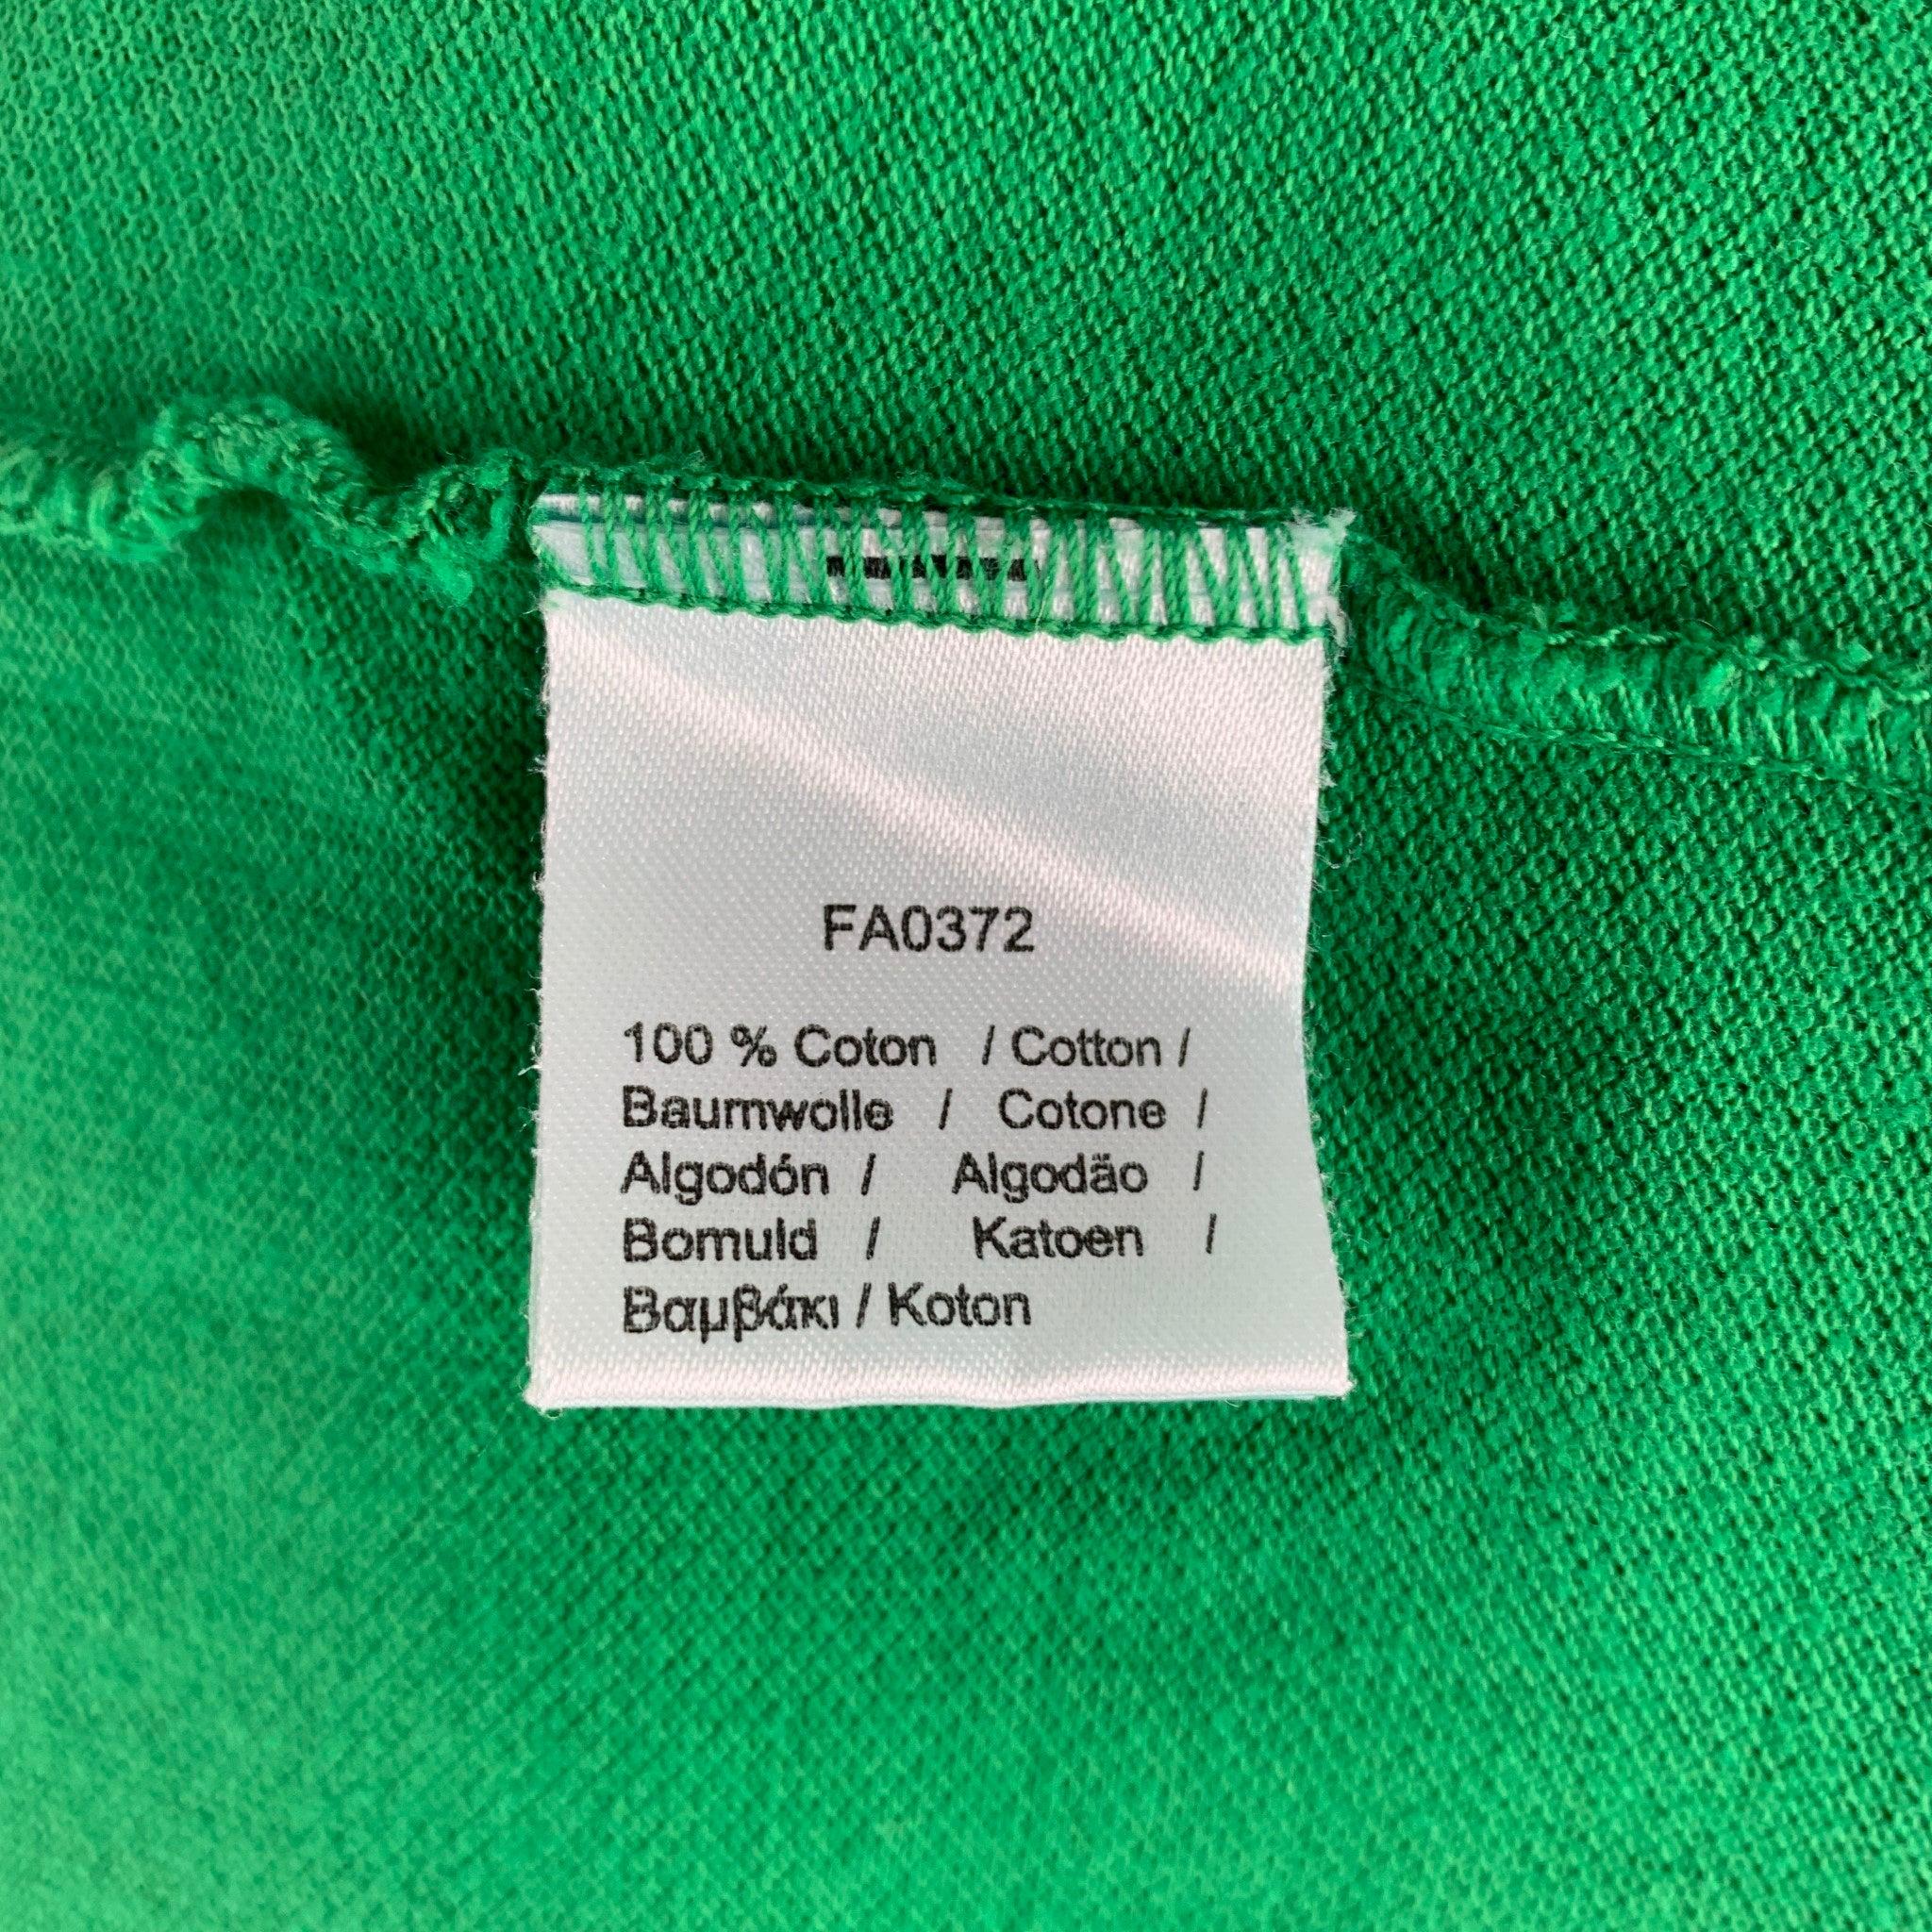 LACOSTE Size L Green Embroidery Cotton Polo 2